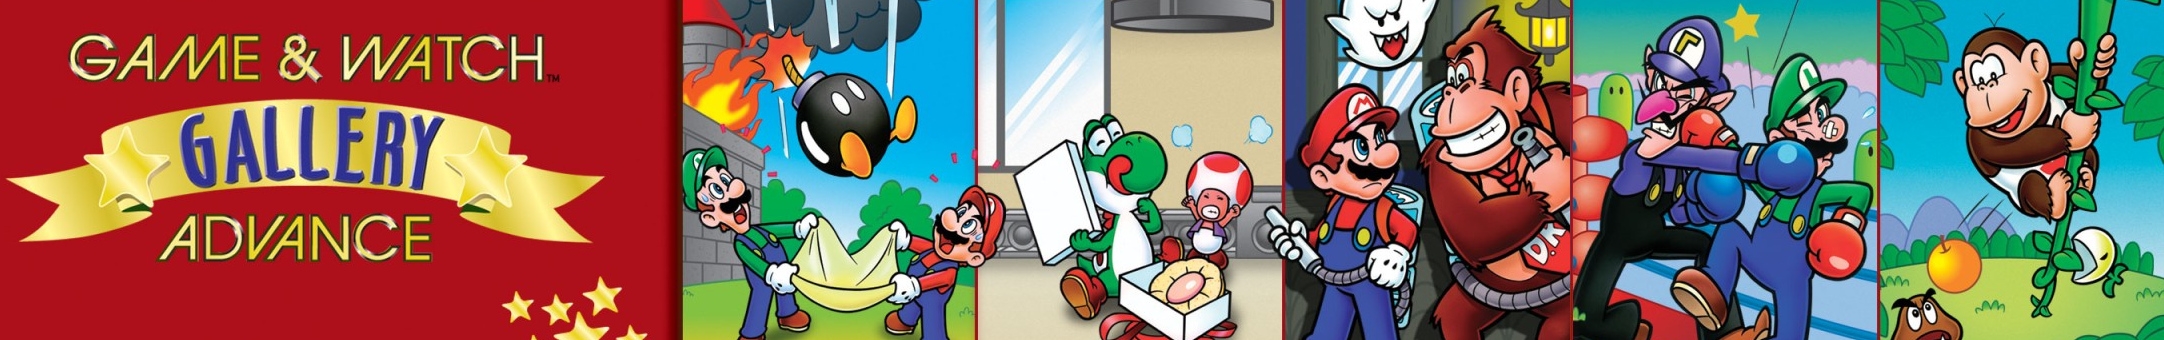 Banner Game and Watch Gallery Advance